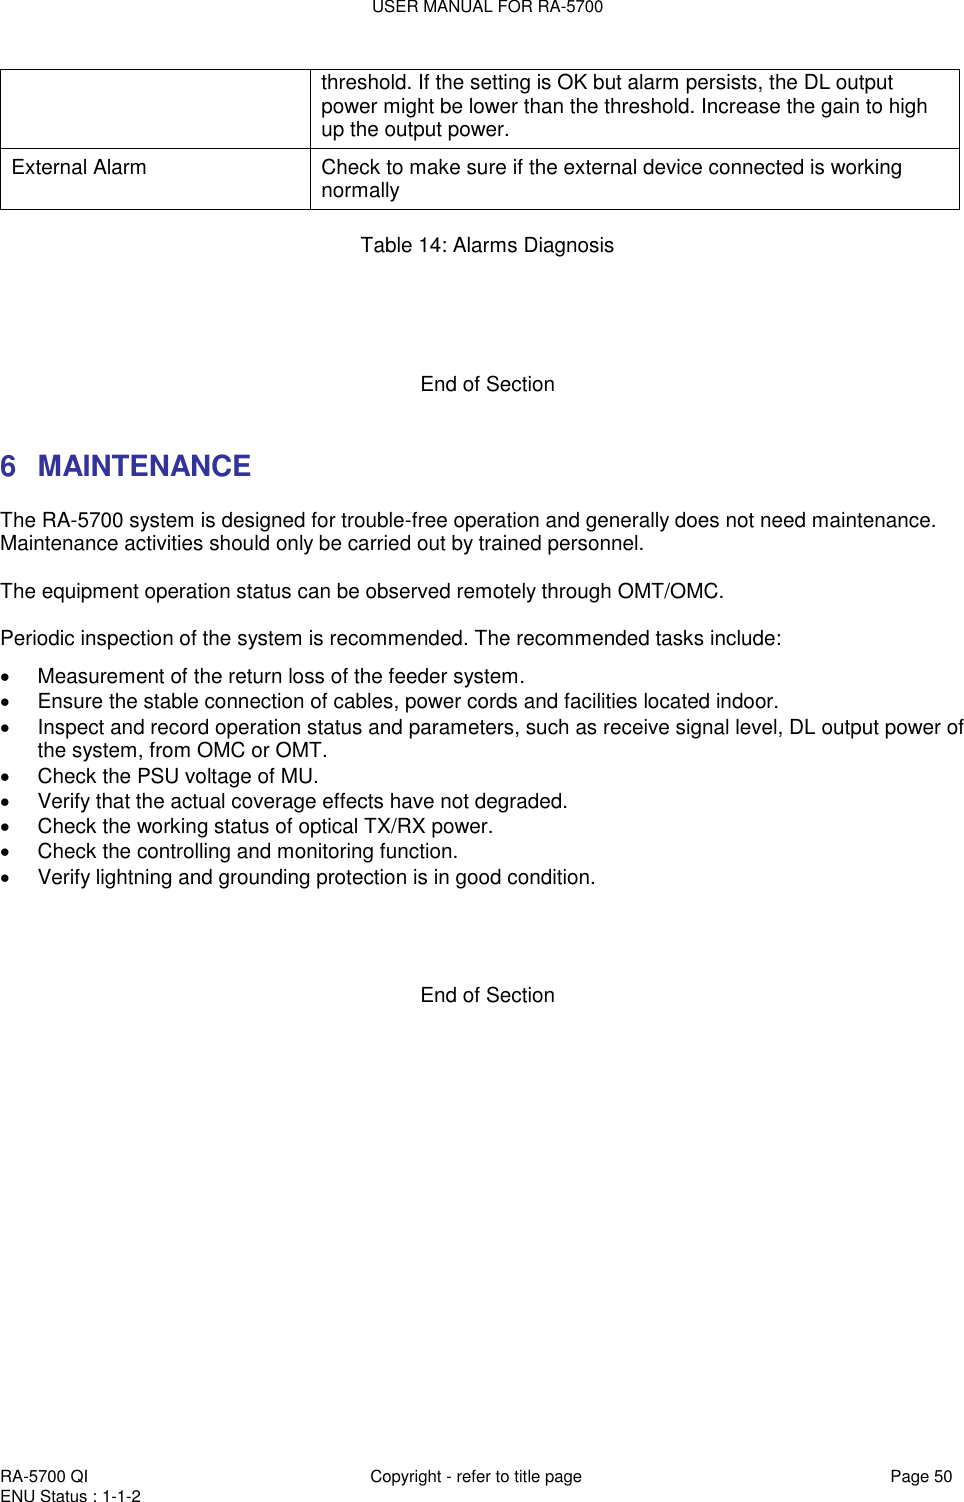 USER MANUAL FOR RA-5700  RA-5700 QI  Copyright - refer to title page Page 50 ENU Status : 1-1-2    threshold. If the setting is OK but alarm persists, the DL output power might be lower than the threshold. Increase the gain to high up the output power. External Alarm Check to make sure if the external device connected is working normally  Table 14: Alarms Diagnosis     End of Section   6  MAINTENANCE The RA-5700 system is designed for trouble-free operation and generally does not need maintenance. Maintenance activities should only be carried out by trained personnel.  The equipment operation status can be observed remotely through OMT/OMC.  Periodic inspection of the system is recommended. The recommended tasks include:   Measurement of the return loss of the feeder system.   Ensure the stable connection of cables, power cords and facilities located indoor.    Inspect and record operation status and parameters, such as receive signal level, DL output power of the system, from OMC or OMT.    Check the PSU voltage of MU.  Verify that the actual coverage effects have not degraded.   Check the working status of optical TX/RX power.   Check the controlling and monitoring function.    Verify lightning and grounding protection is in good condition.      End of Section 